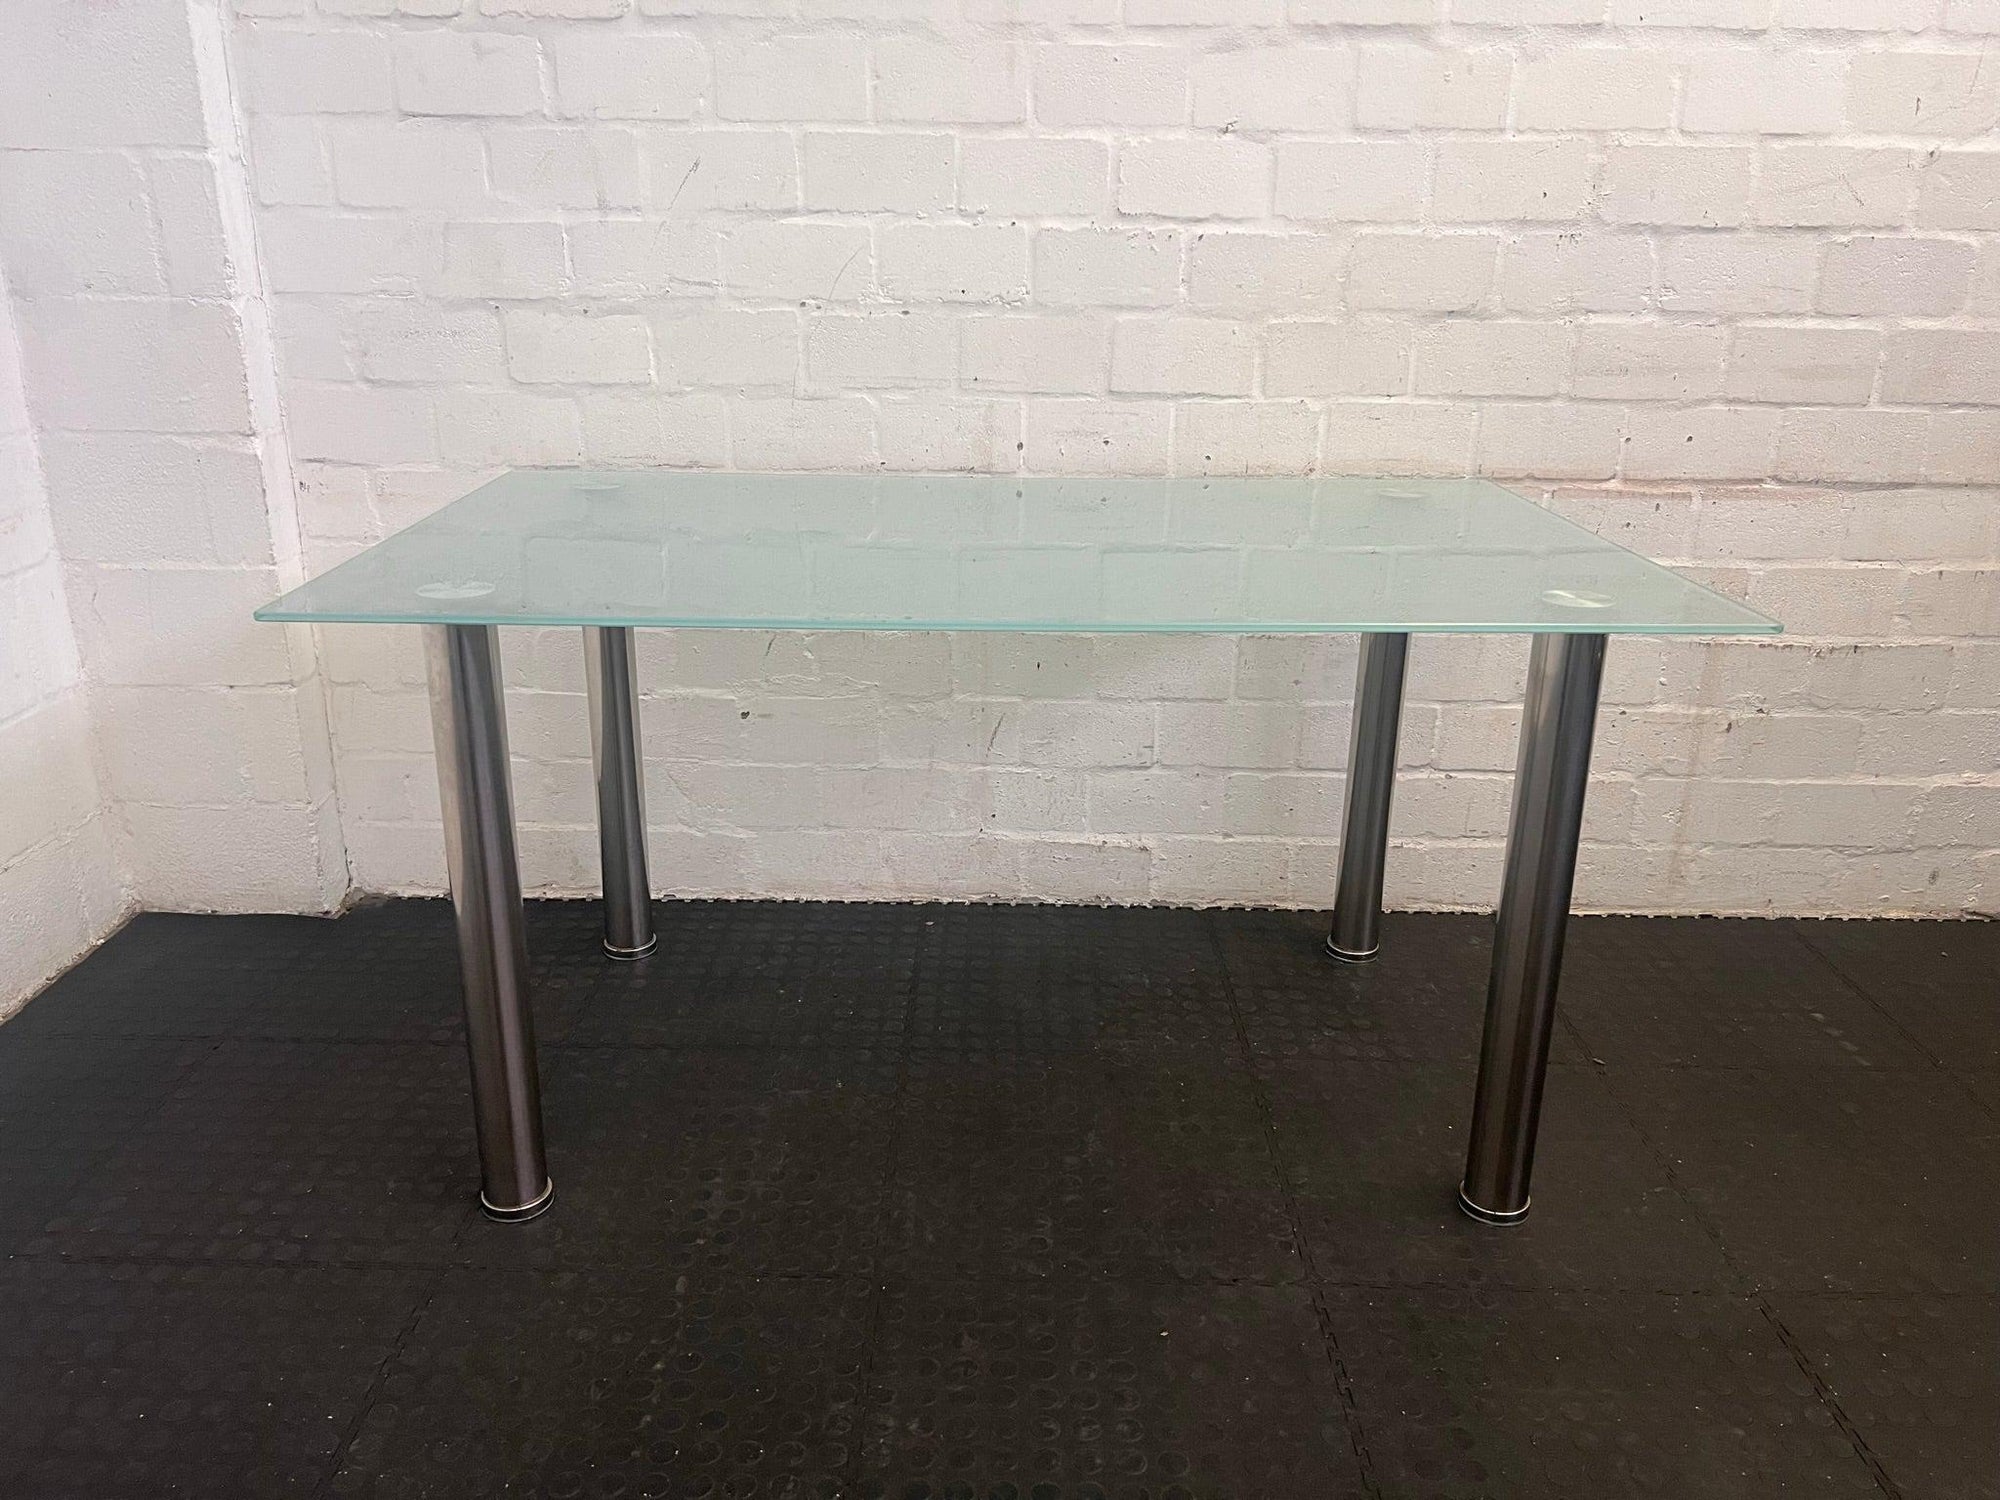 Steel Legged Dining Room Table with Glass Top - REDUCED